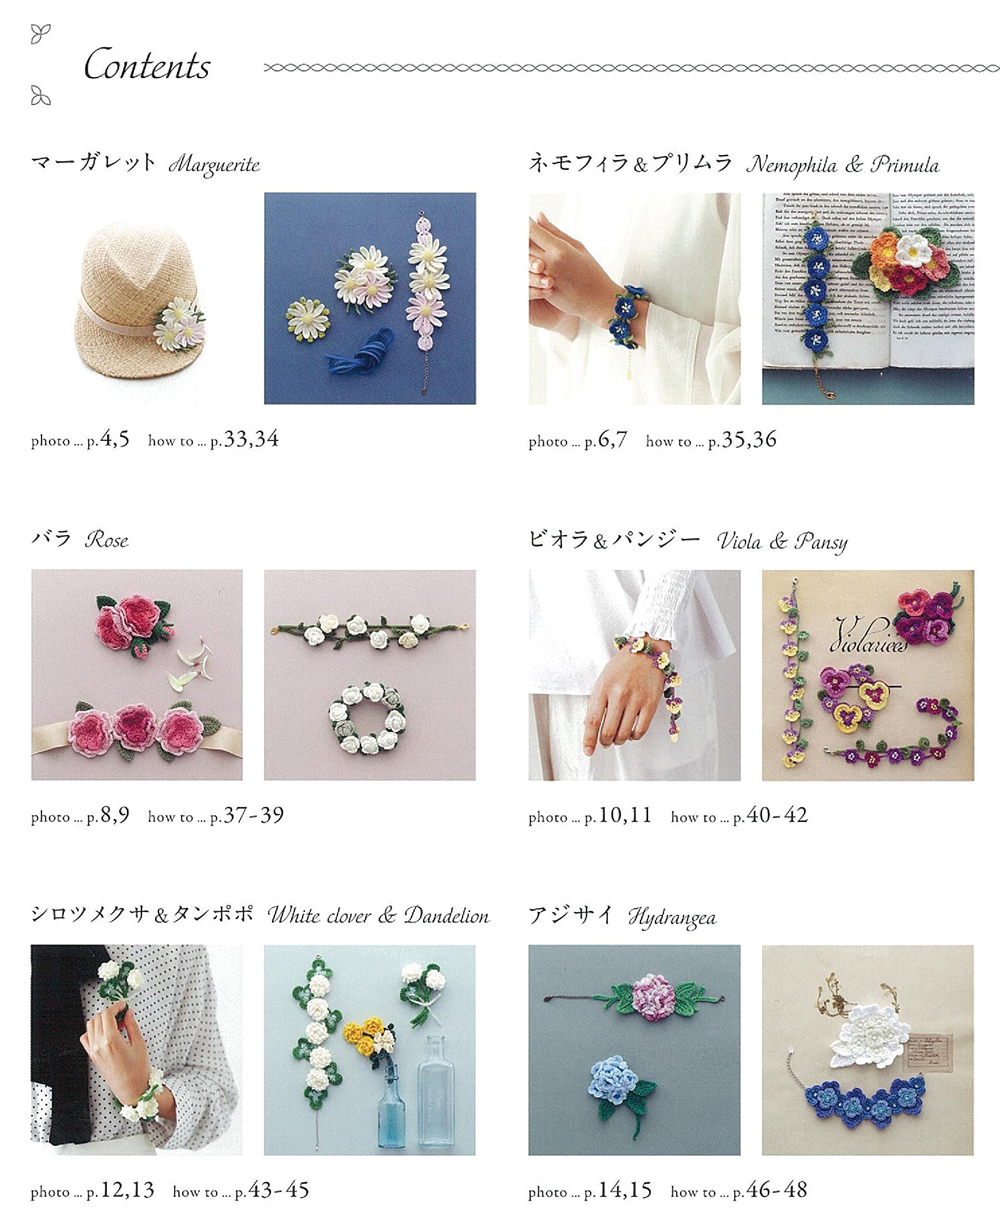 Knitting with embroidery thread Crochet accessories lovely corsage and bracelet